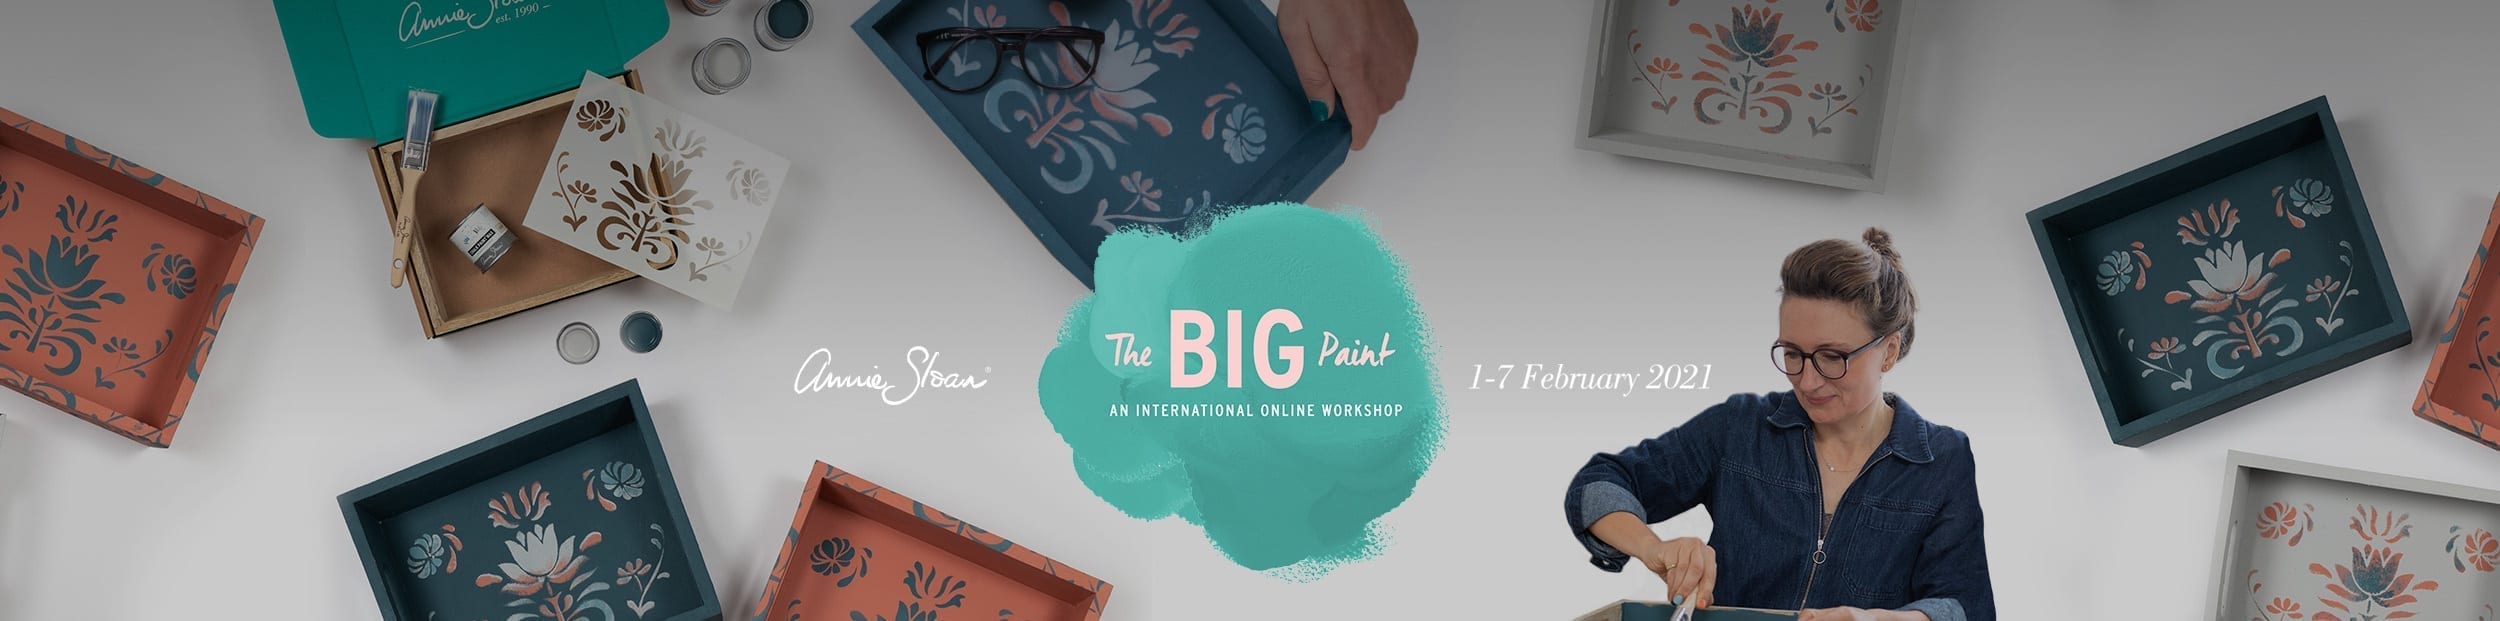 The Big Paint workshop by Annie Sloan - paint your own tray with Chalk Paint® furniture paint